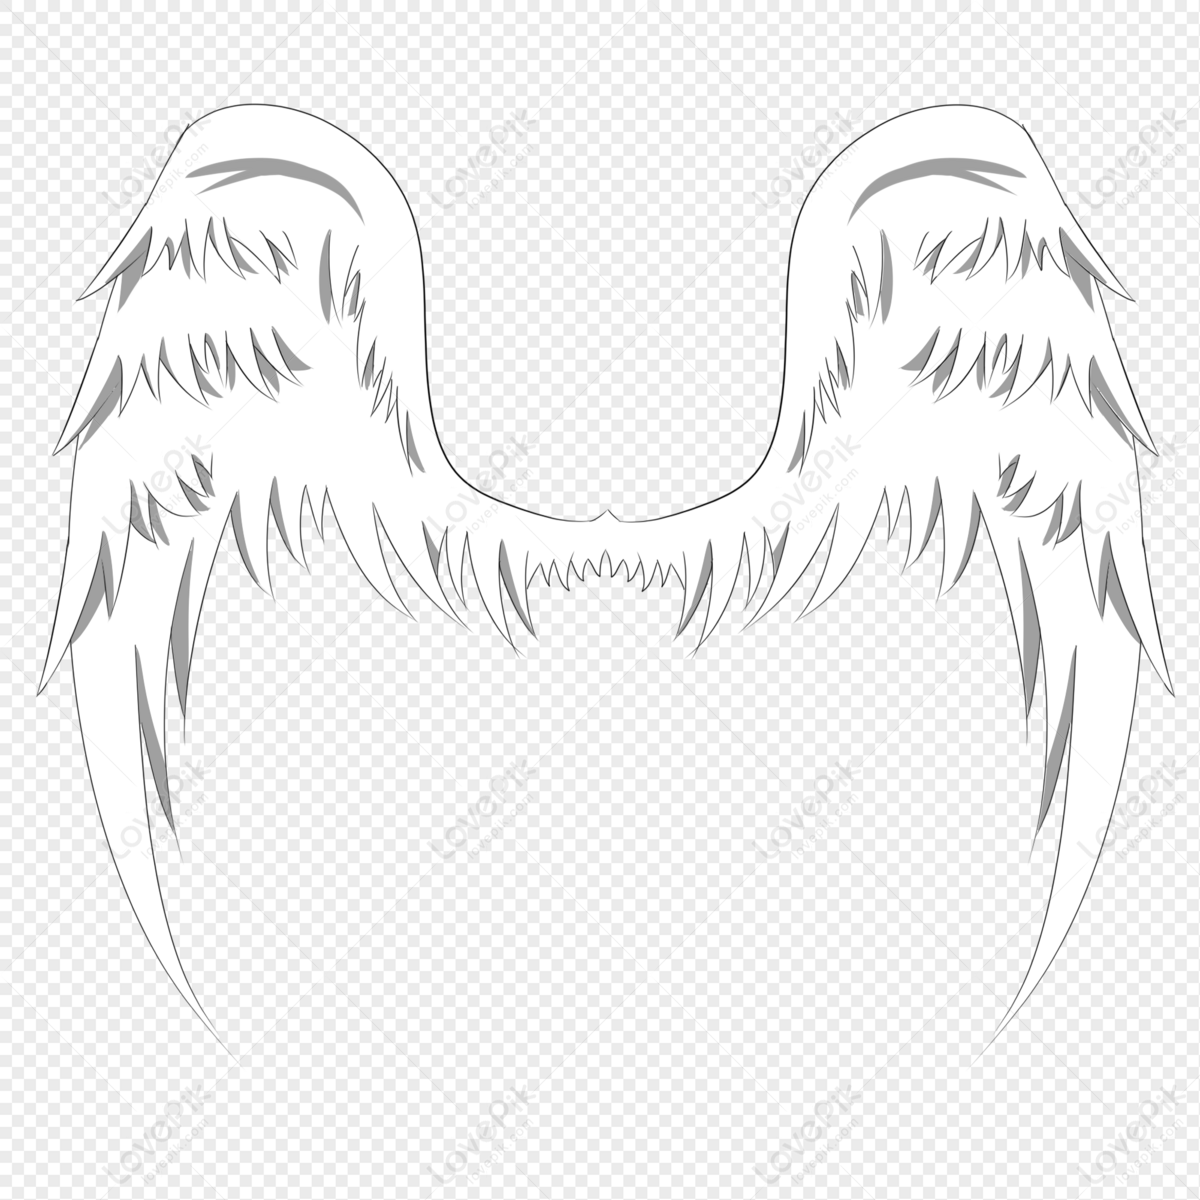 feather wing clipart